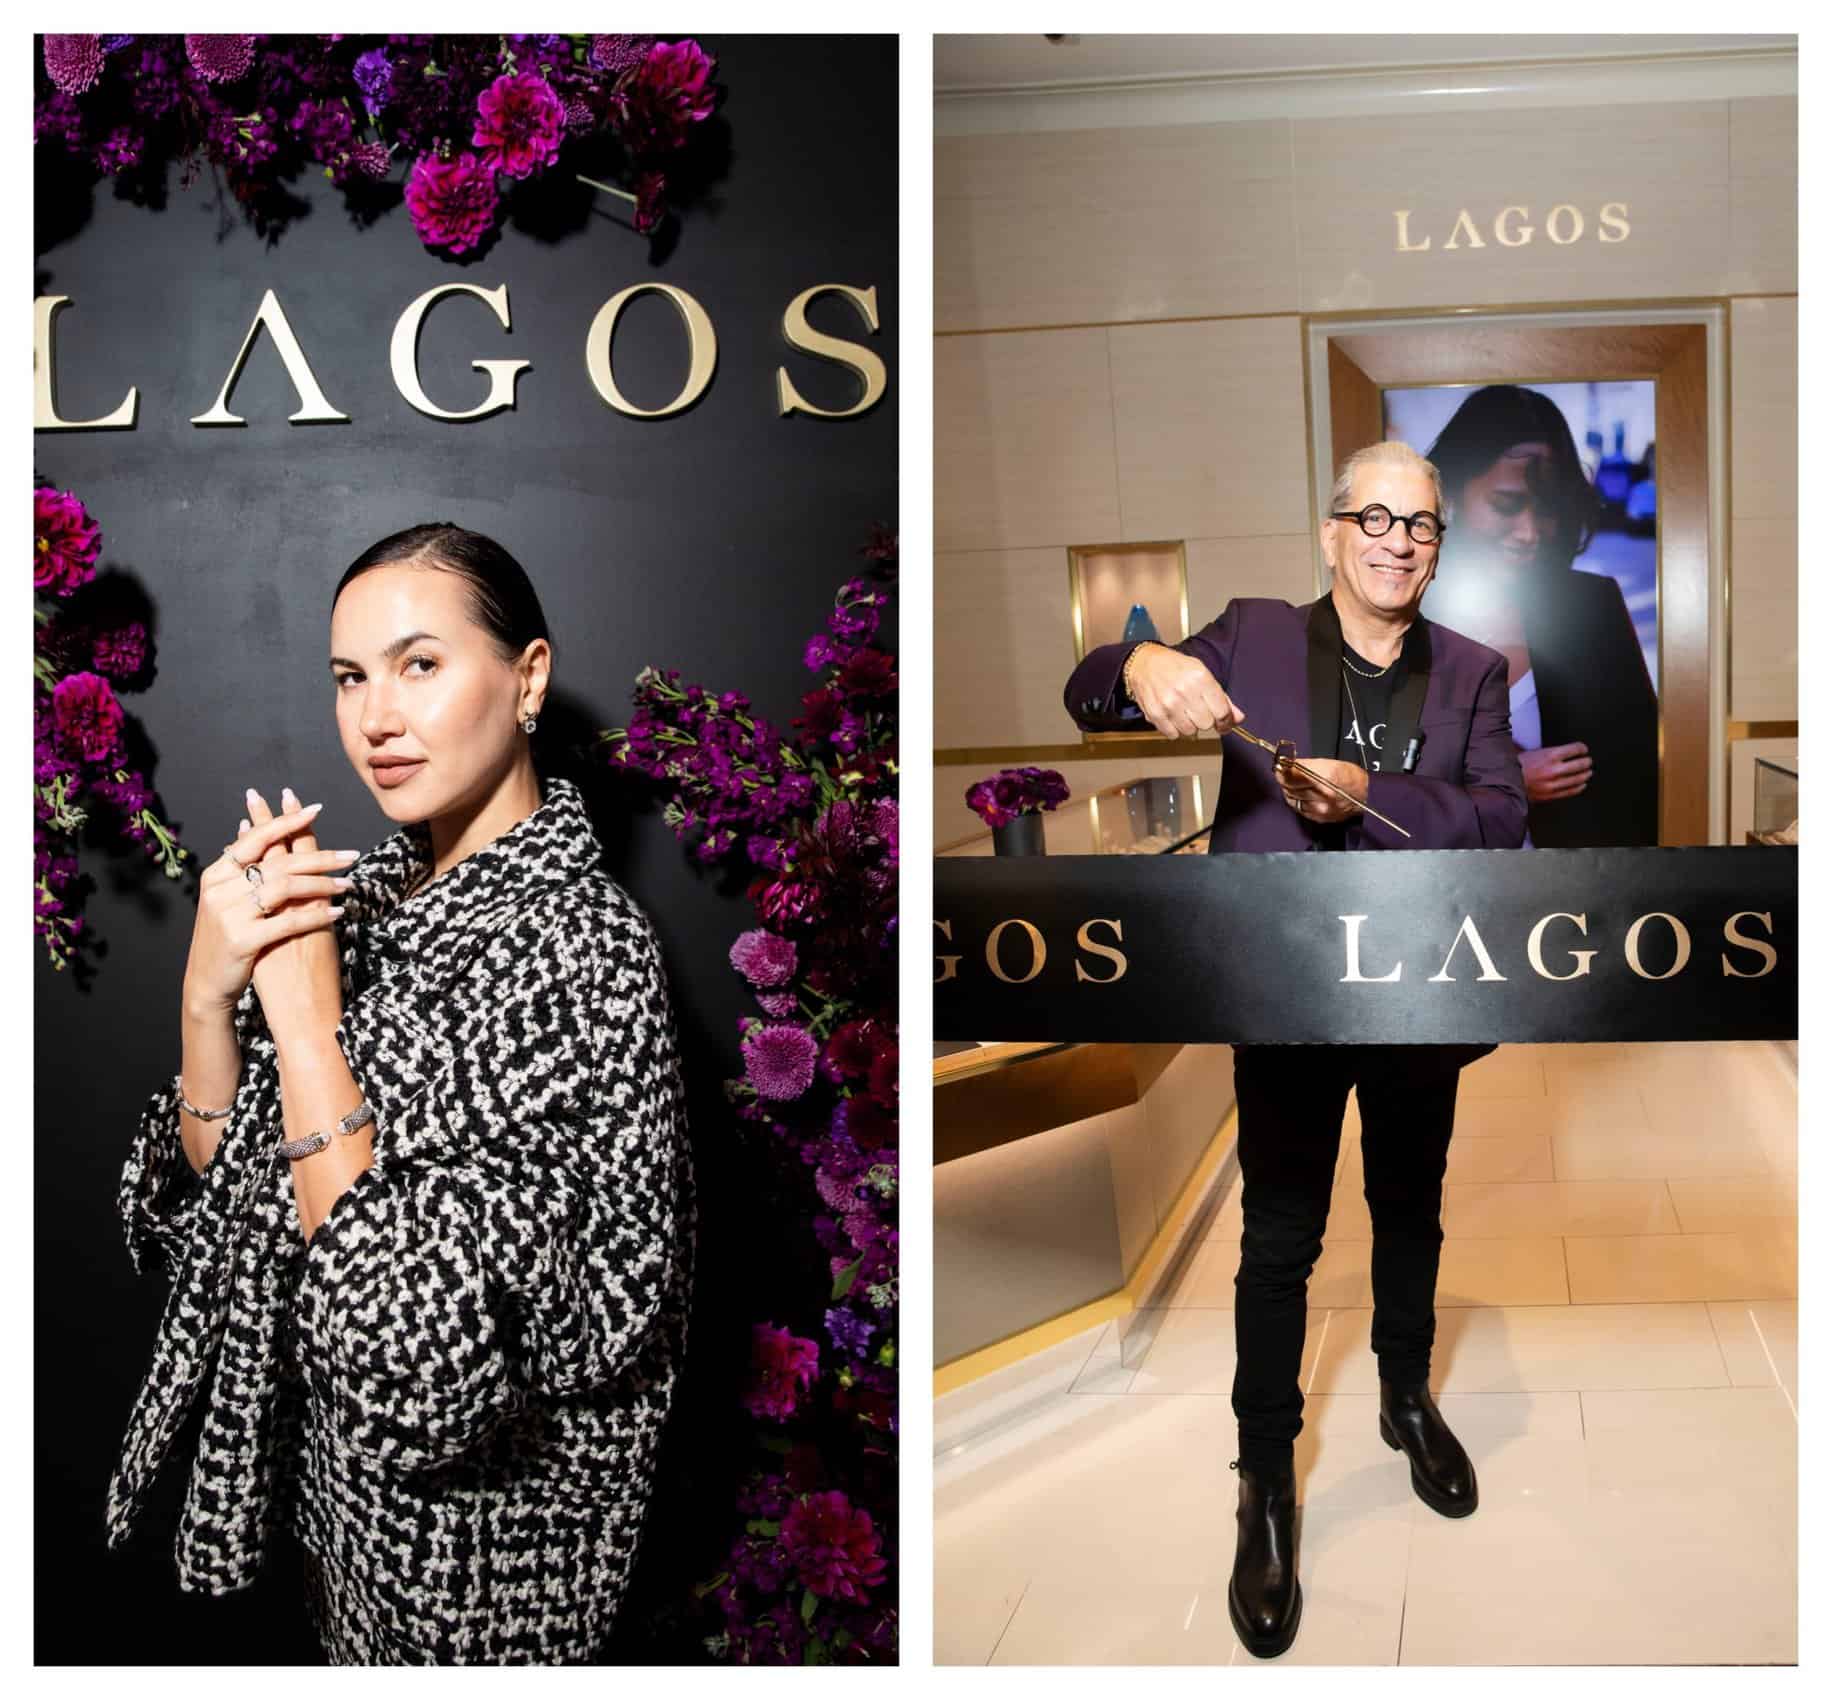 LAGOS Opens New Boutique At Bloomingdale’s 59th Street